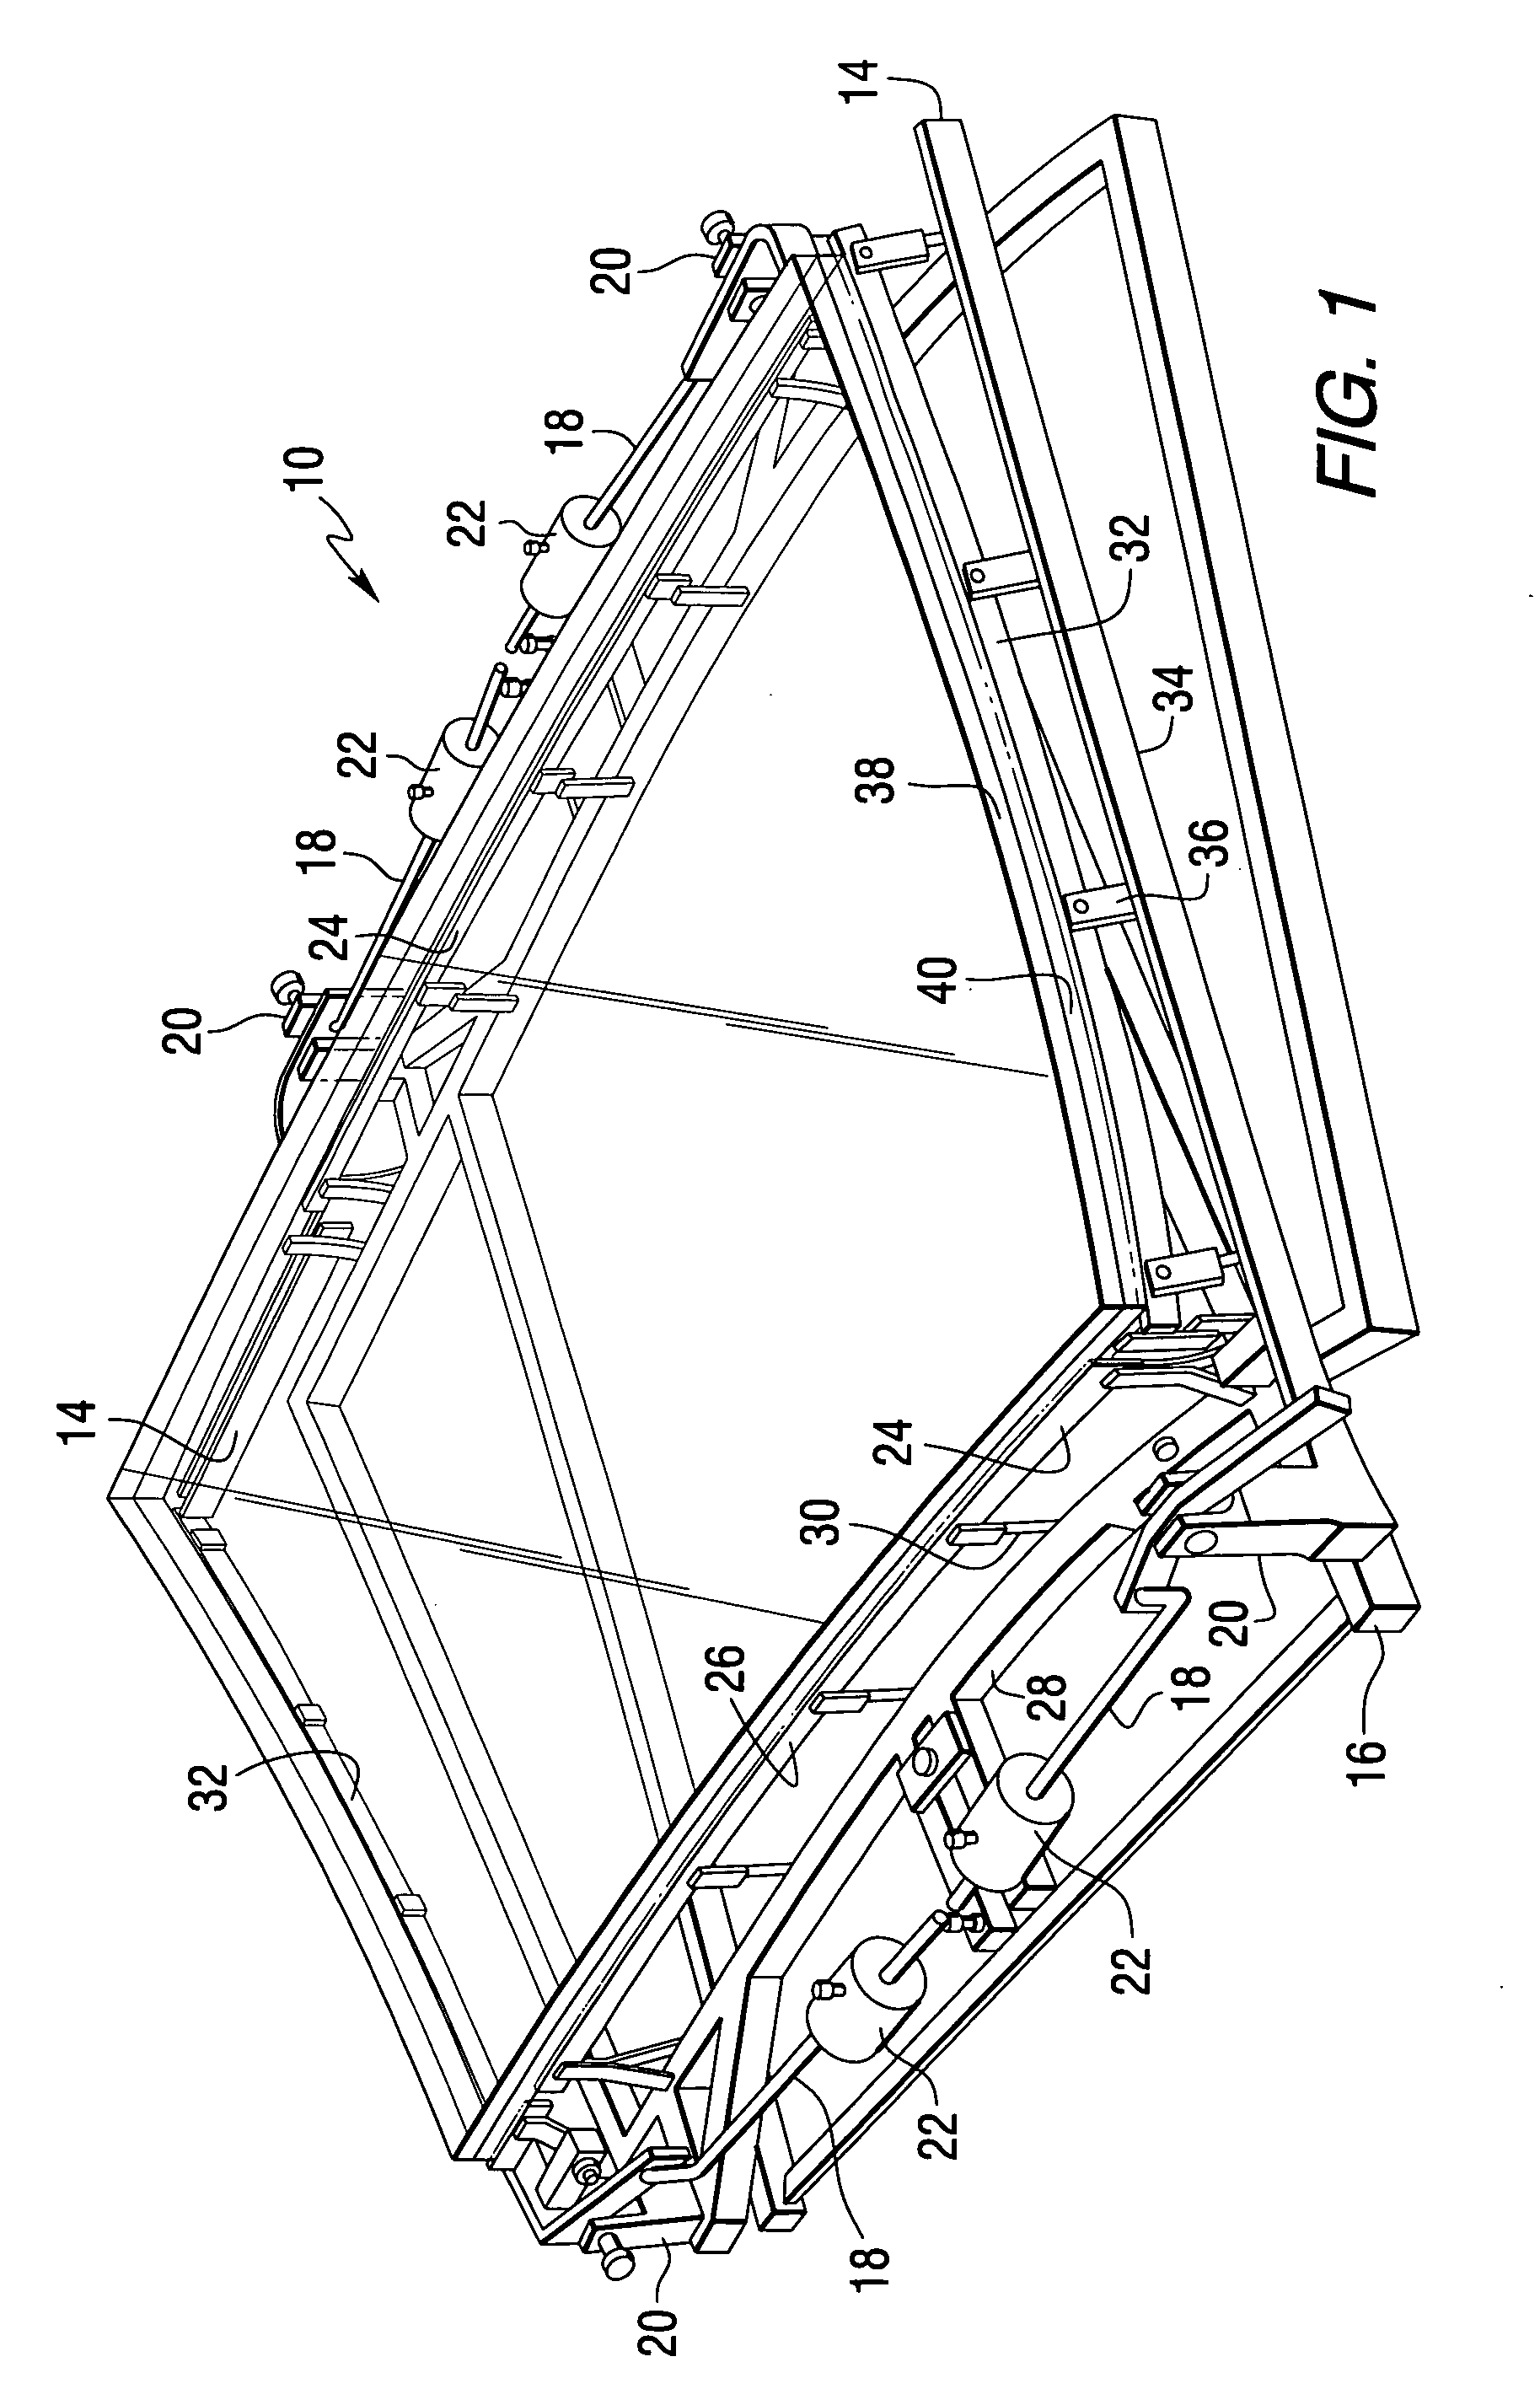 Method of and apparatus for strengthening edges of one or more glass sheets